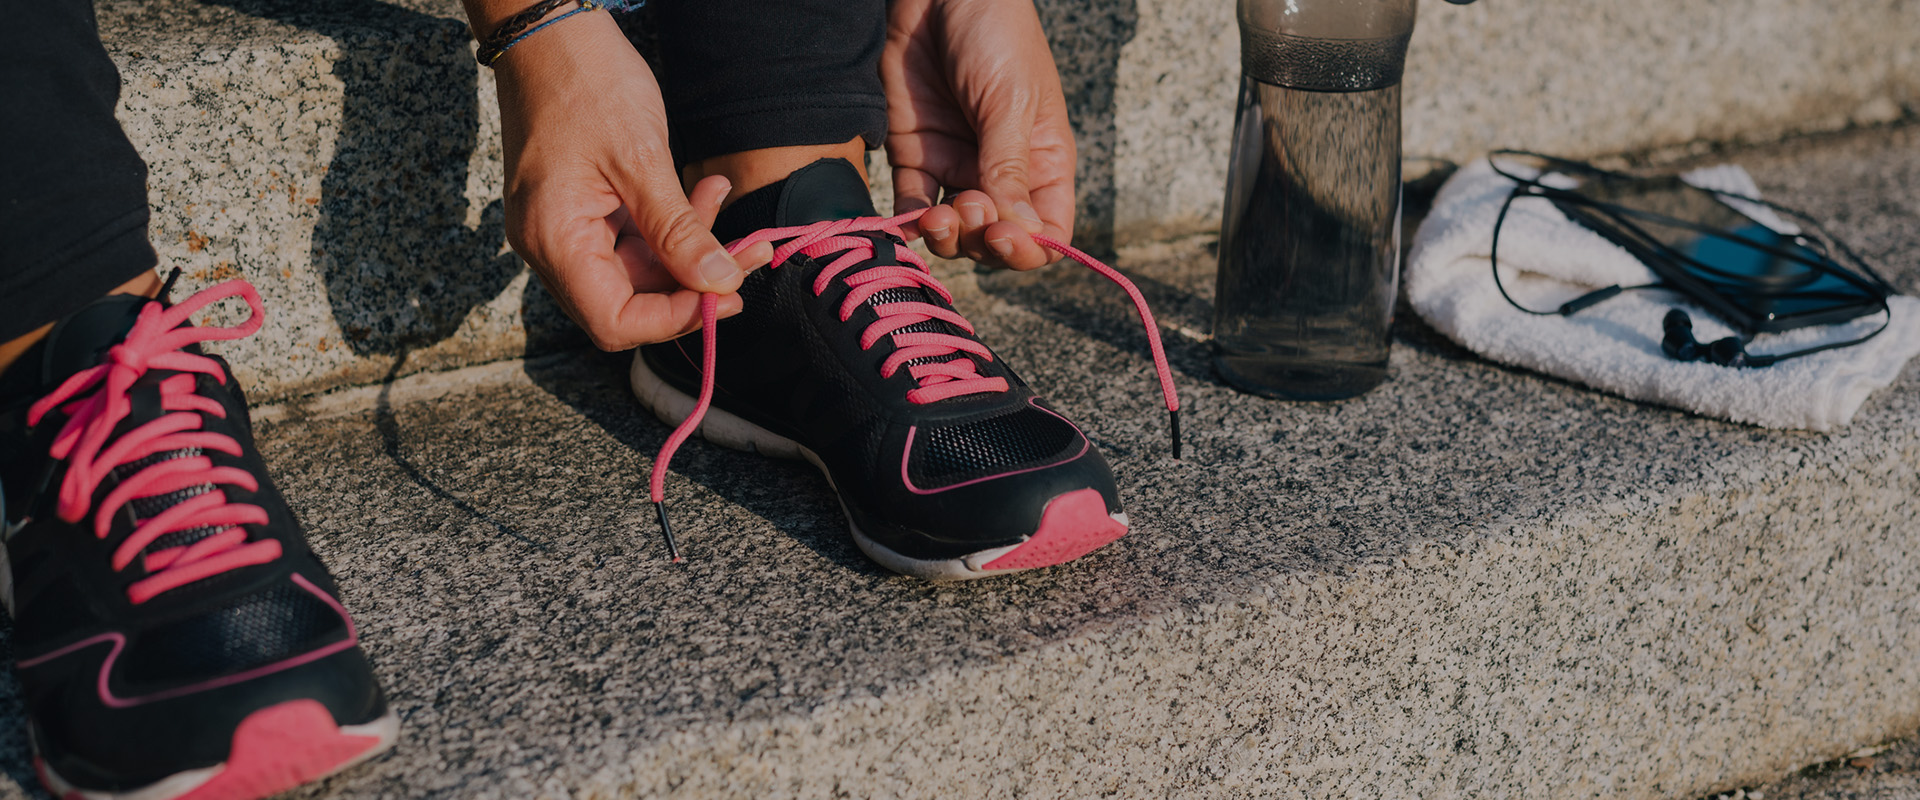 Woman tying pink laces of sport shoes closeup sitting on outdoors stairs with towel, bottle of water and phone with earphones before running training workout routine.